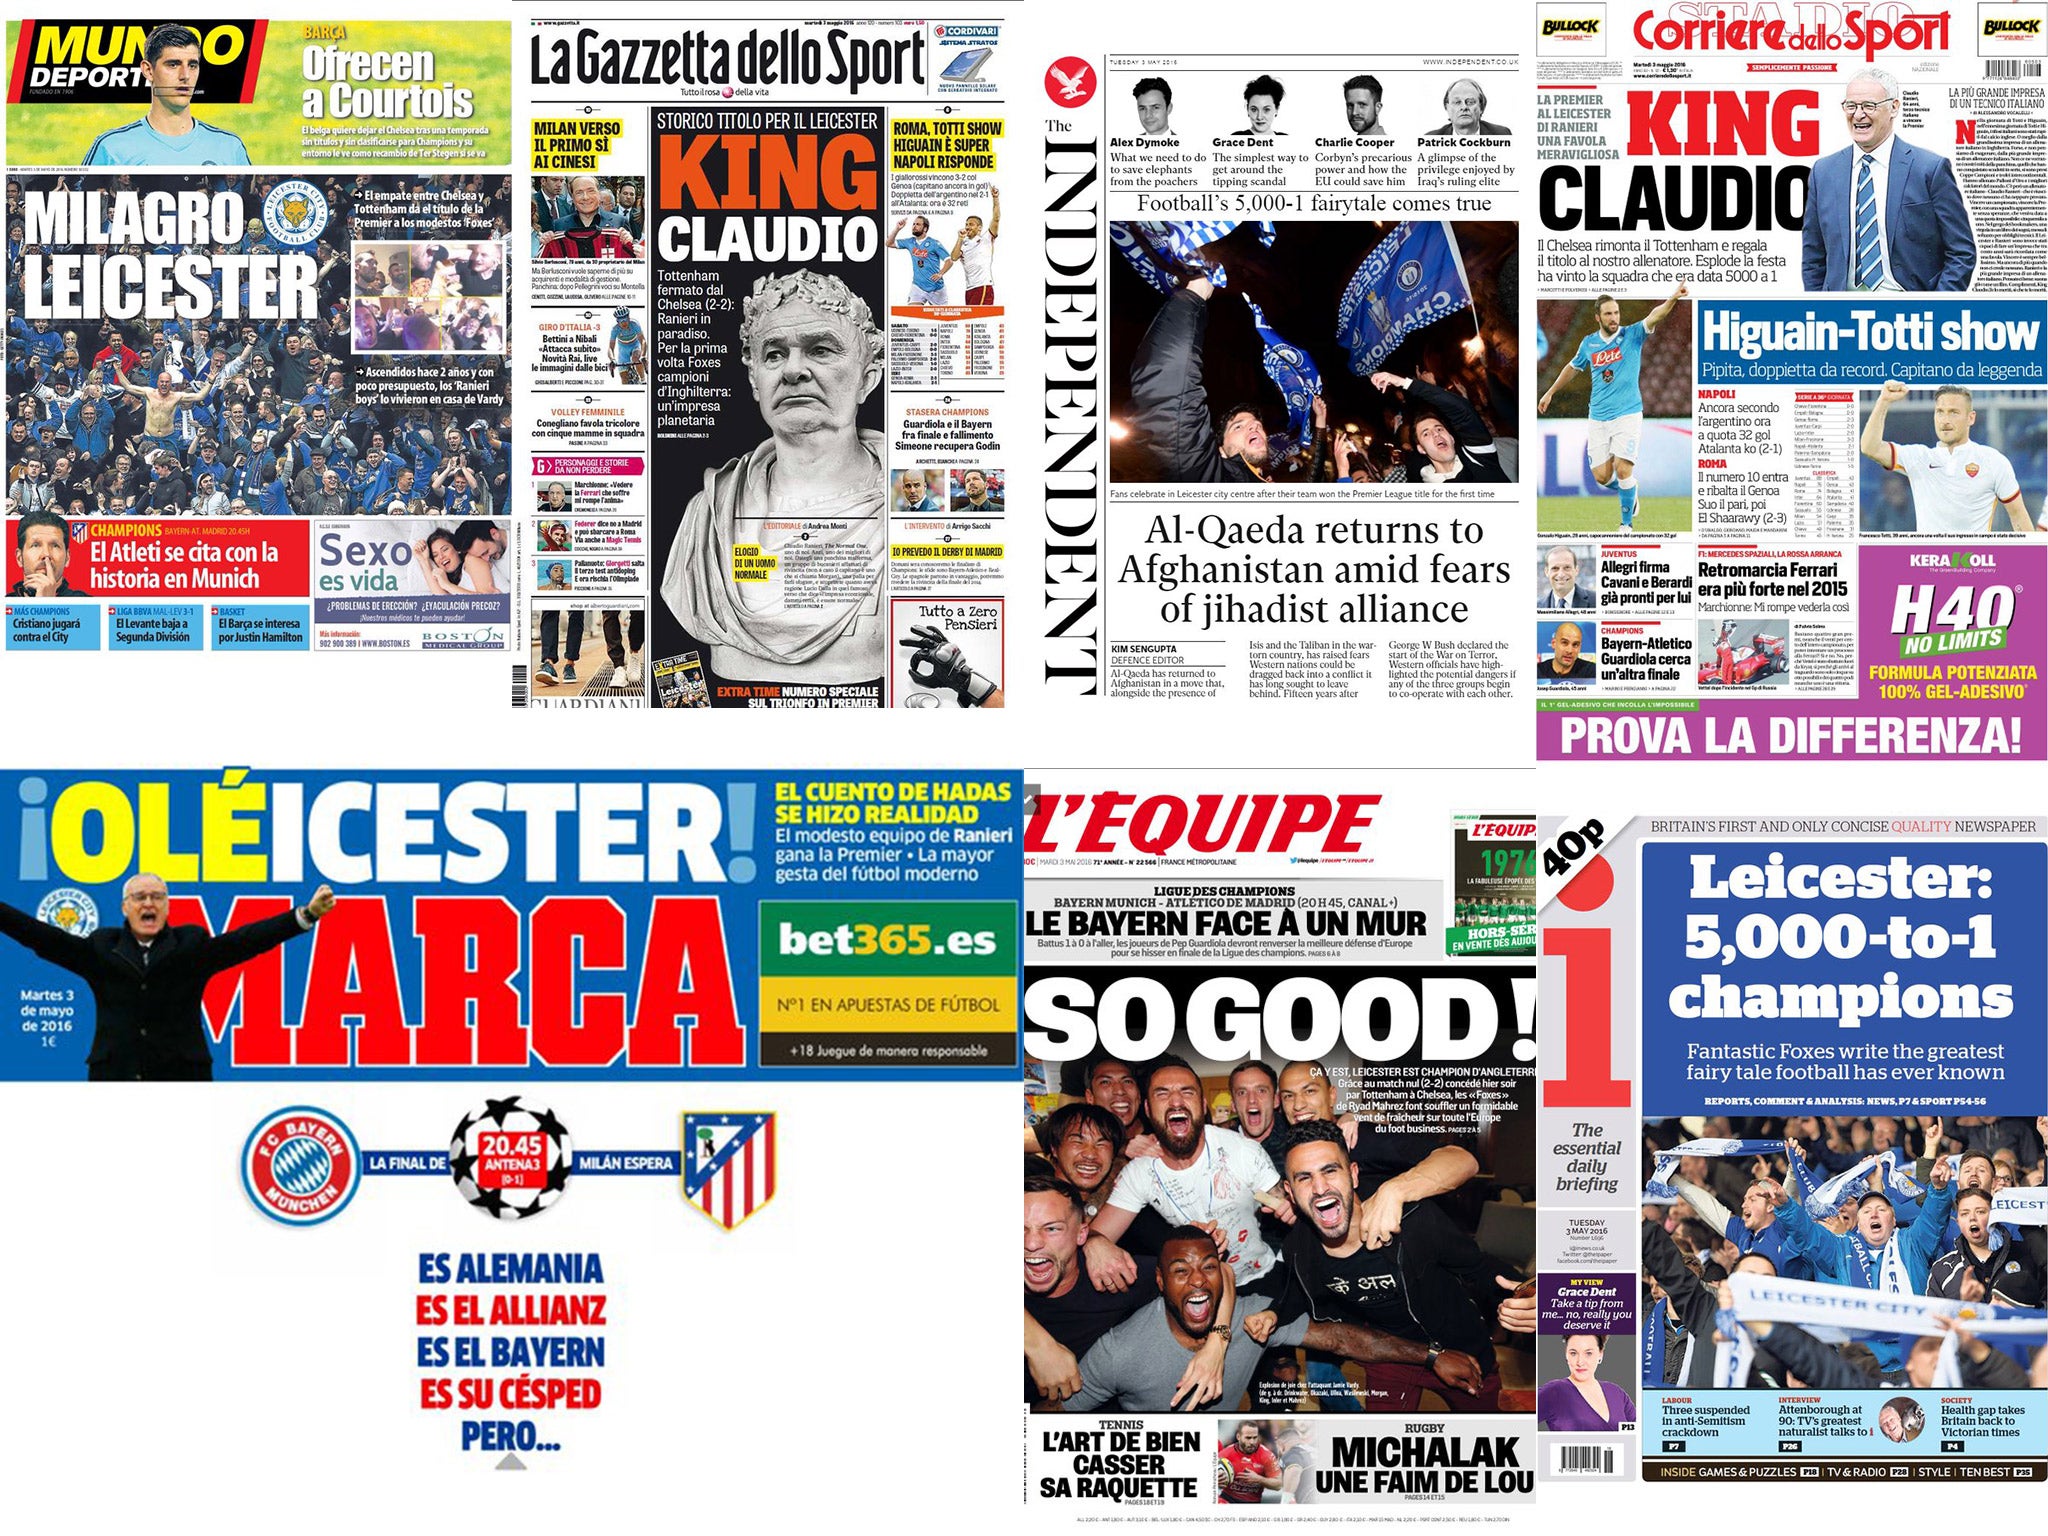 Newspapers around the world have congratulated Leicester on their Premier League title triumph